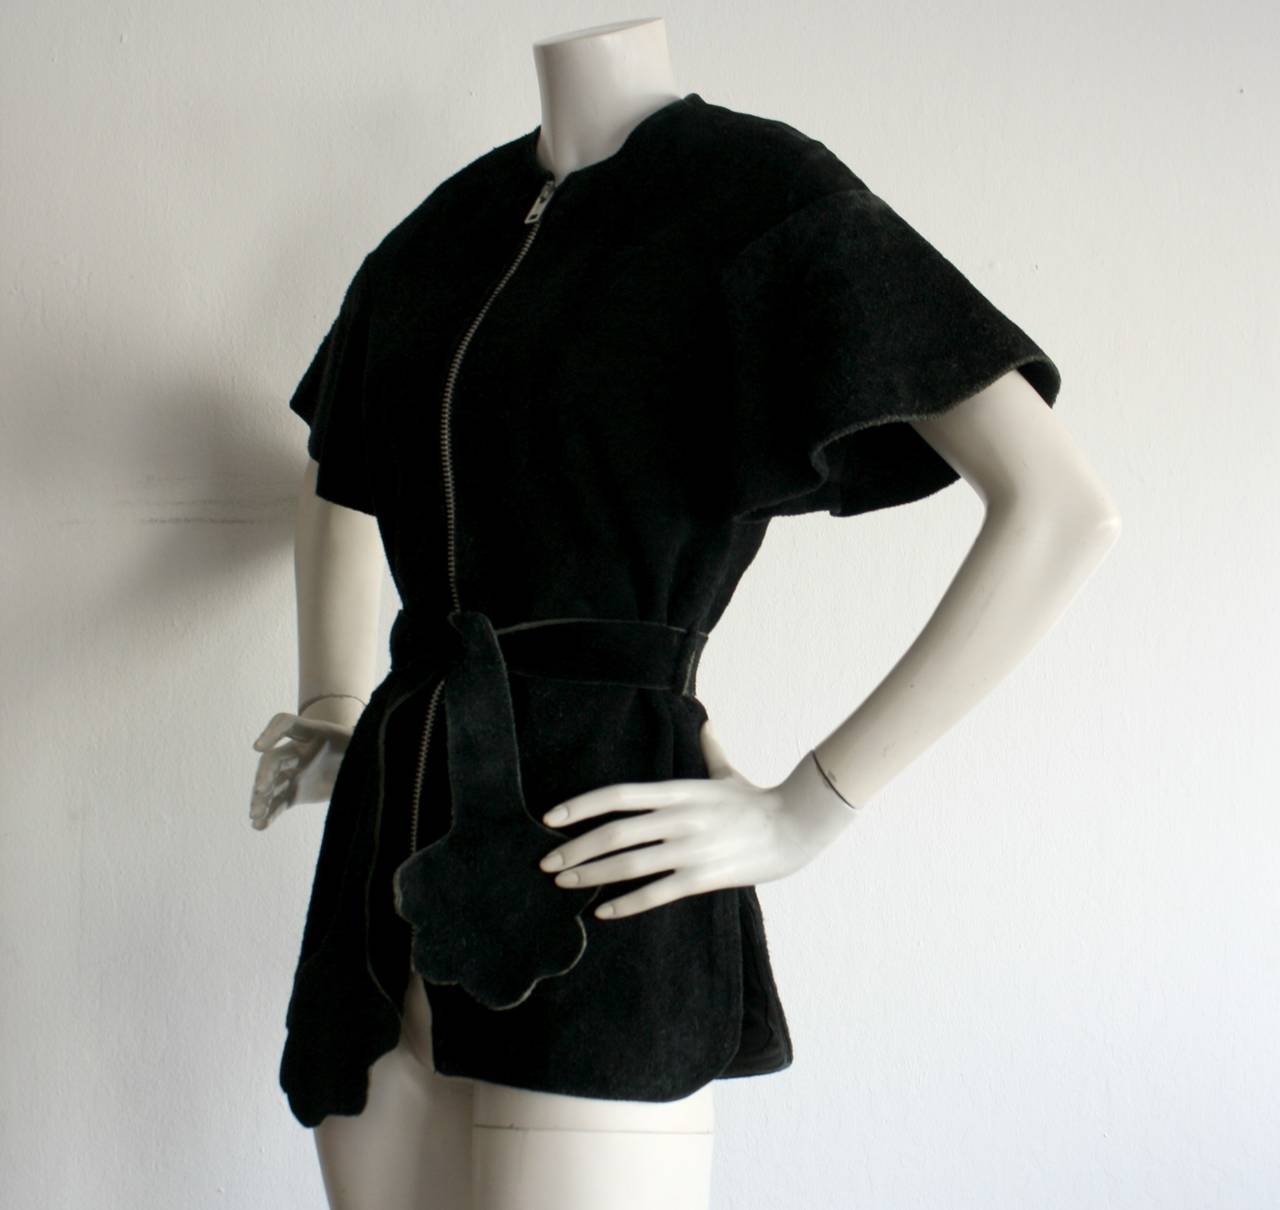 Incredible vintage Pierre Cardin black suede leather tunic top. Bell/Flutter sleeves. Matching belt, with clovers at each end. Metal zipper down the front. A truly iconic Pierre Cardin number! Suede has worn with age in some areas, but is in